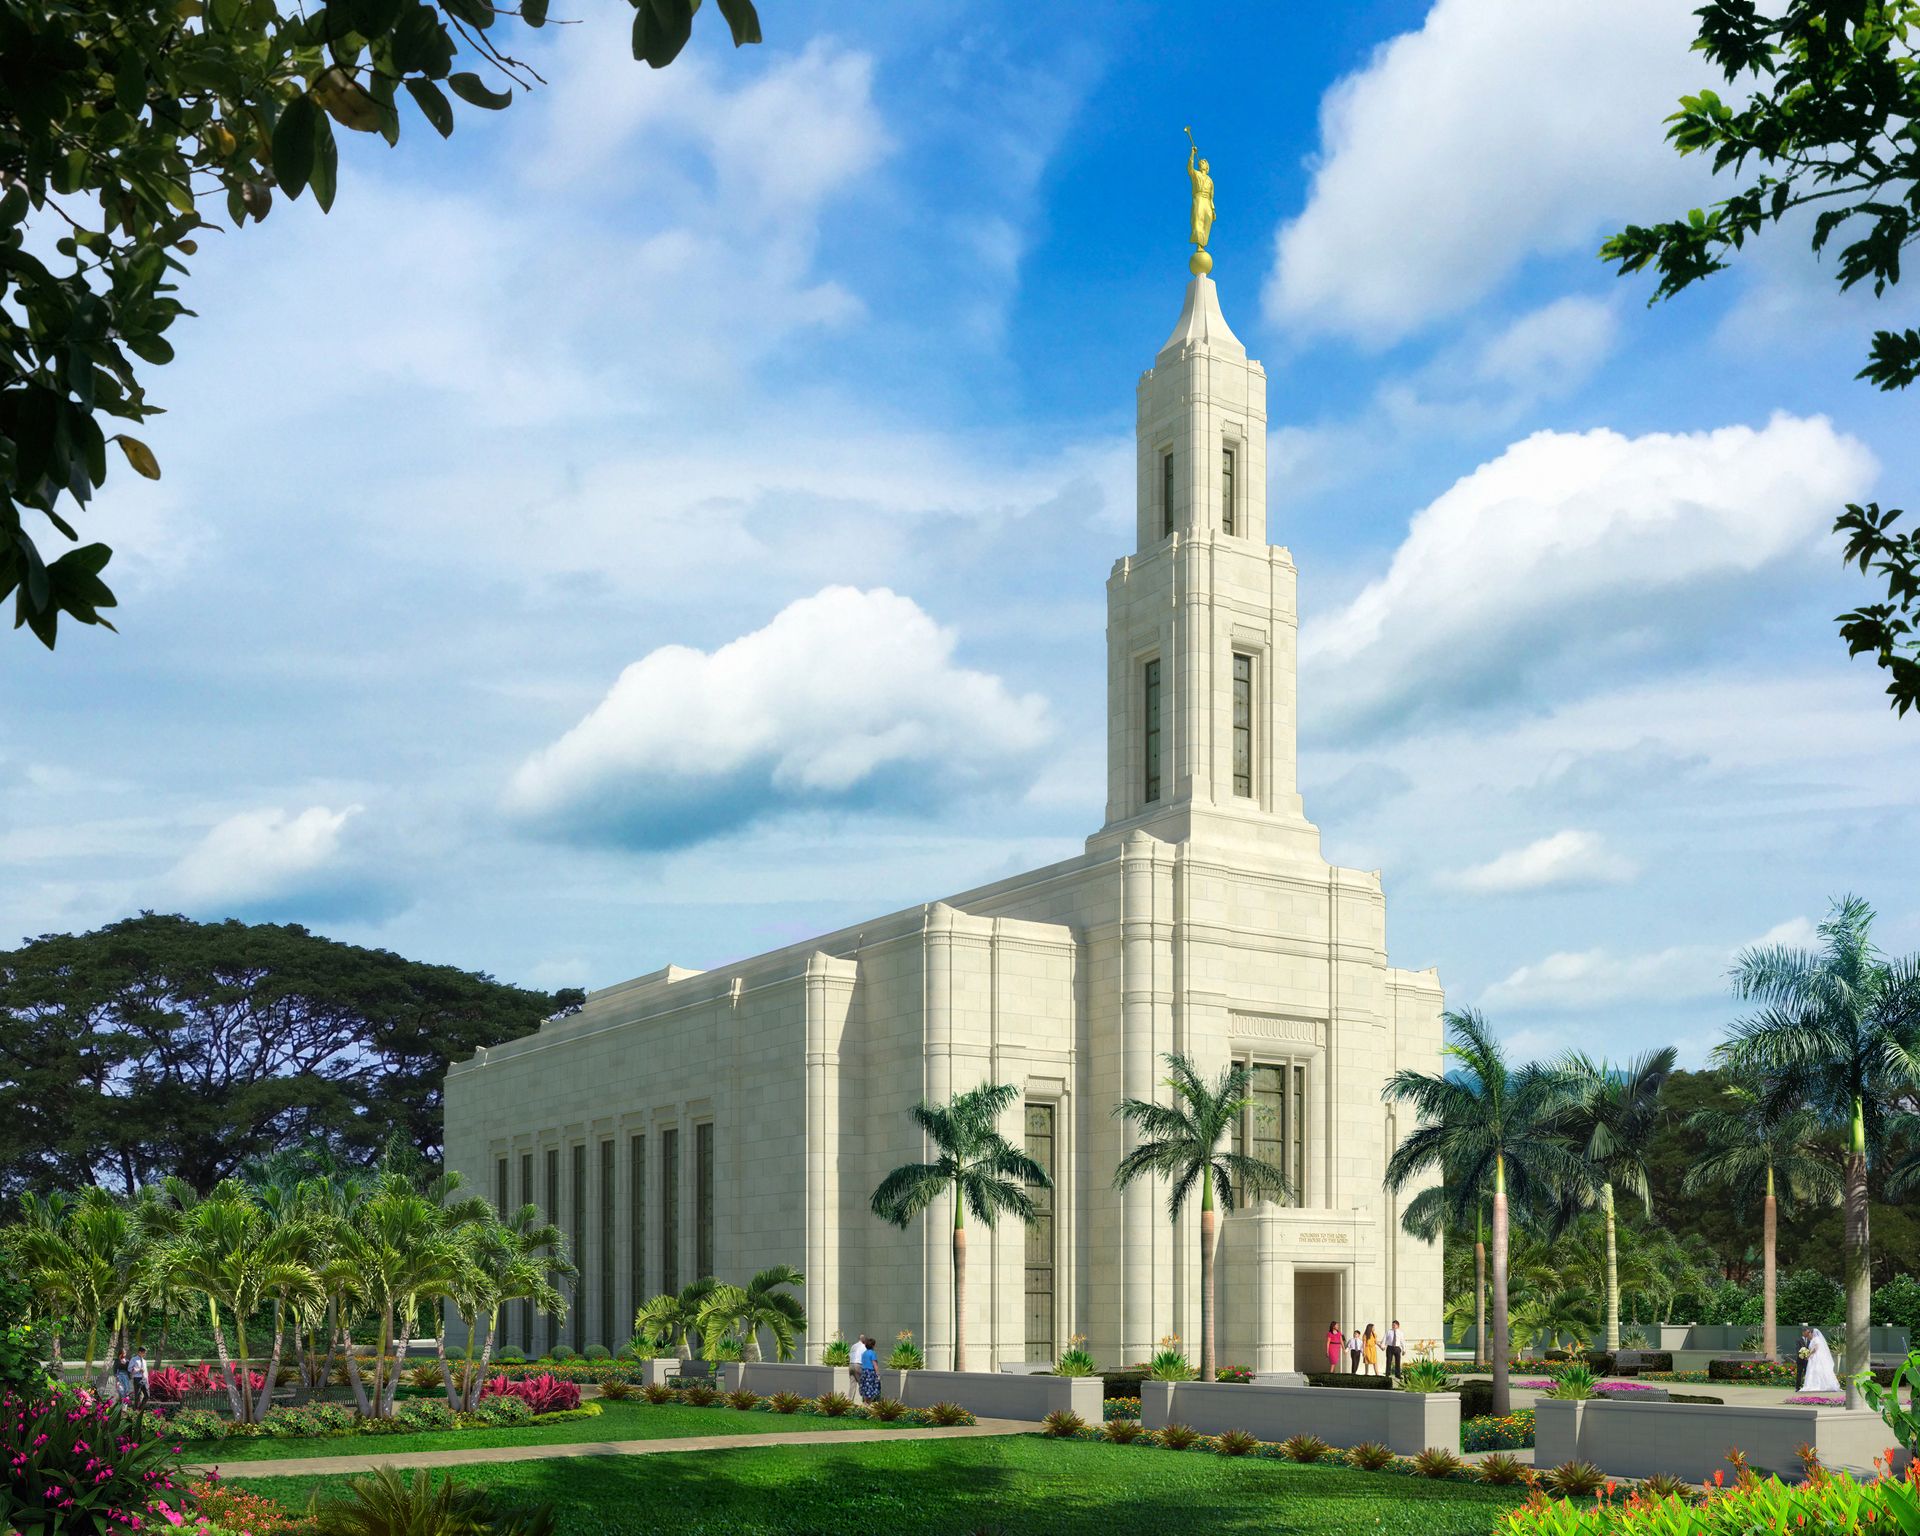 An artist’s rendering of the Urdaneta Philippines Temple.